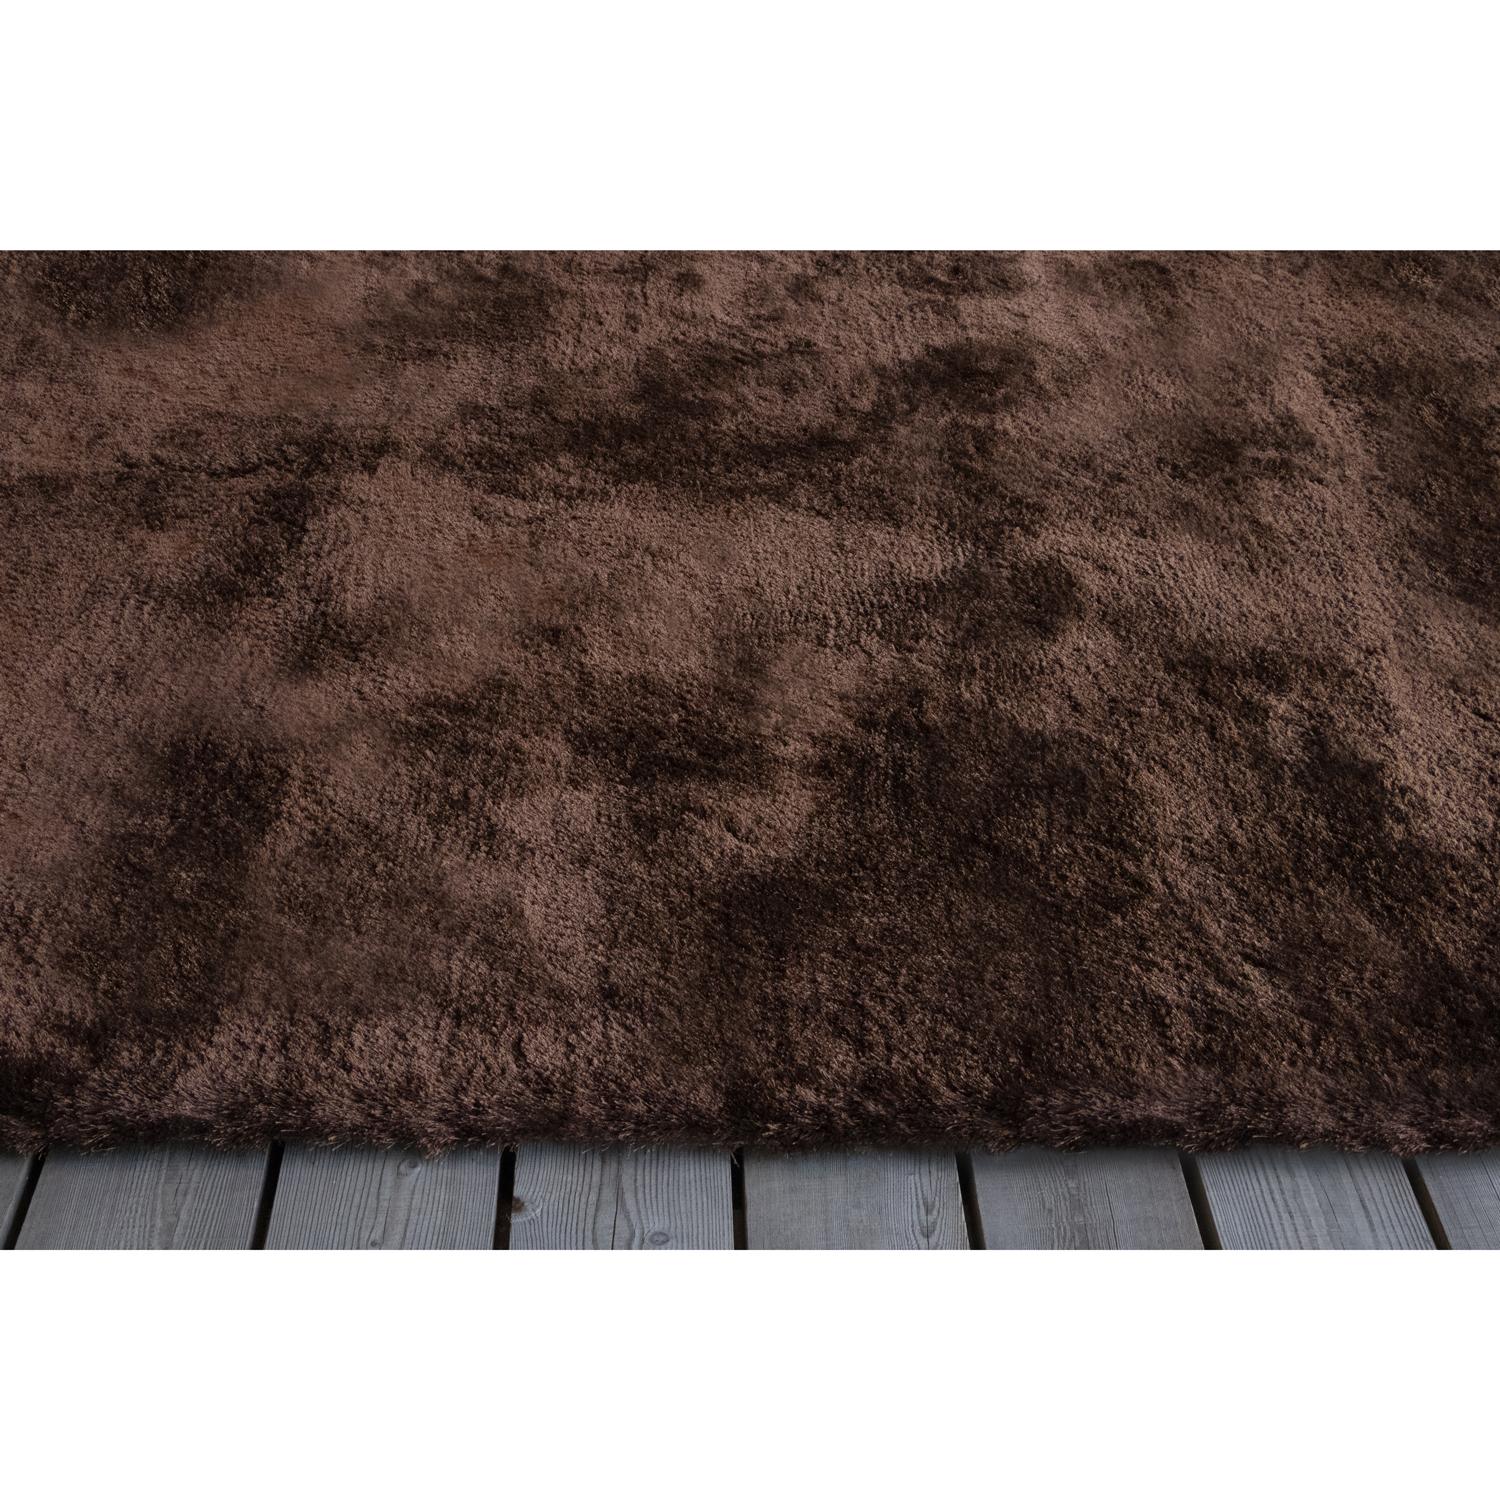 Modern Contemporary Soft Cozy Design Brown Rug by Deanna Comellini In Stock 200x300 cm For Sale